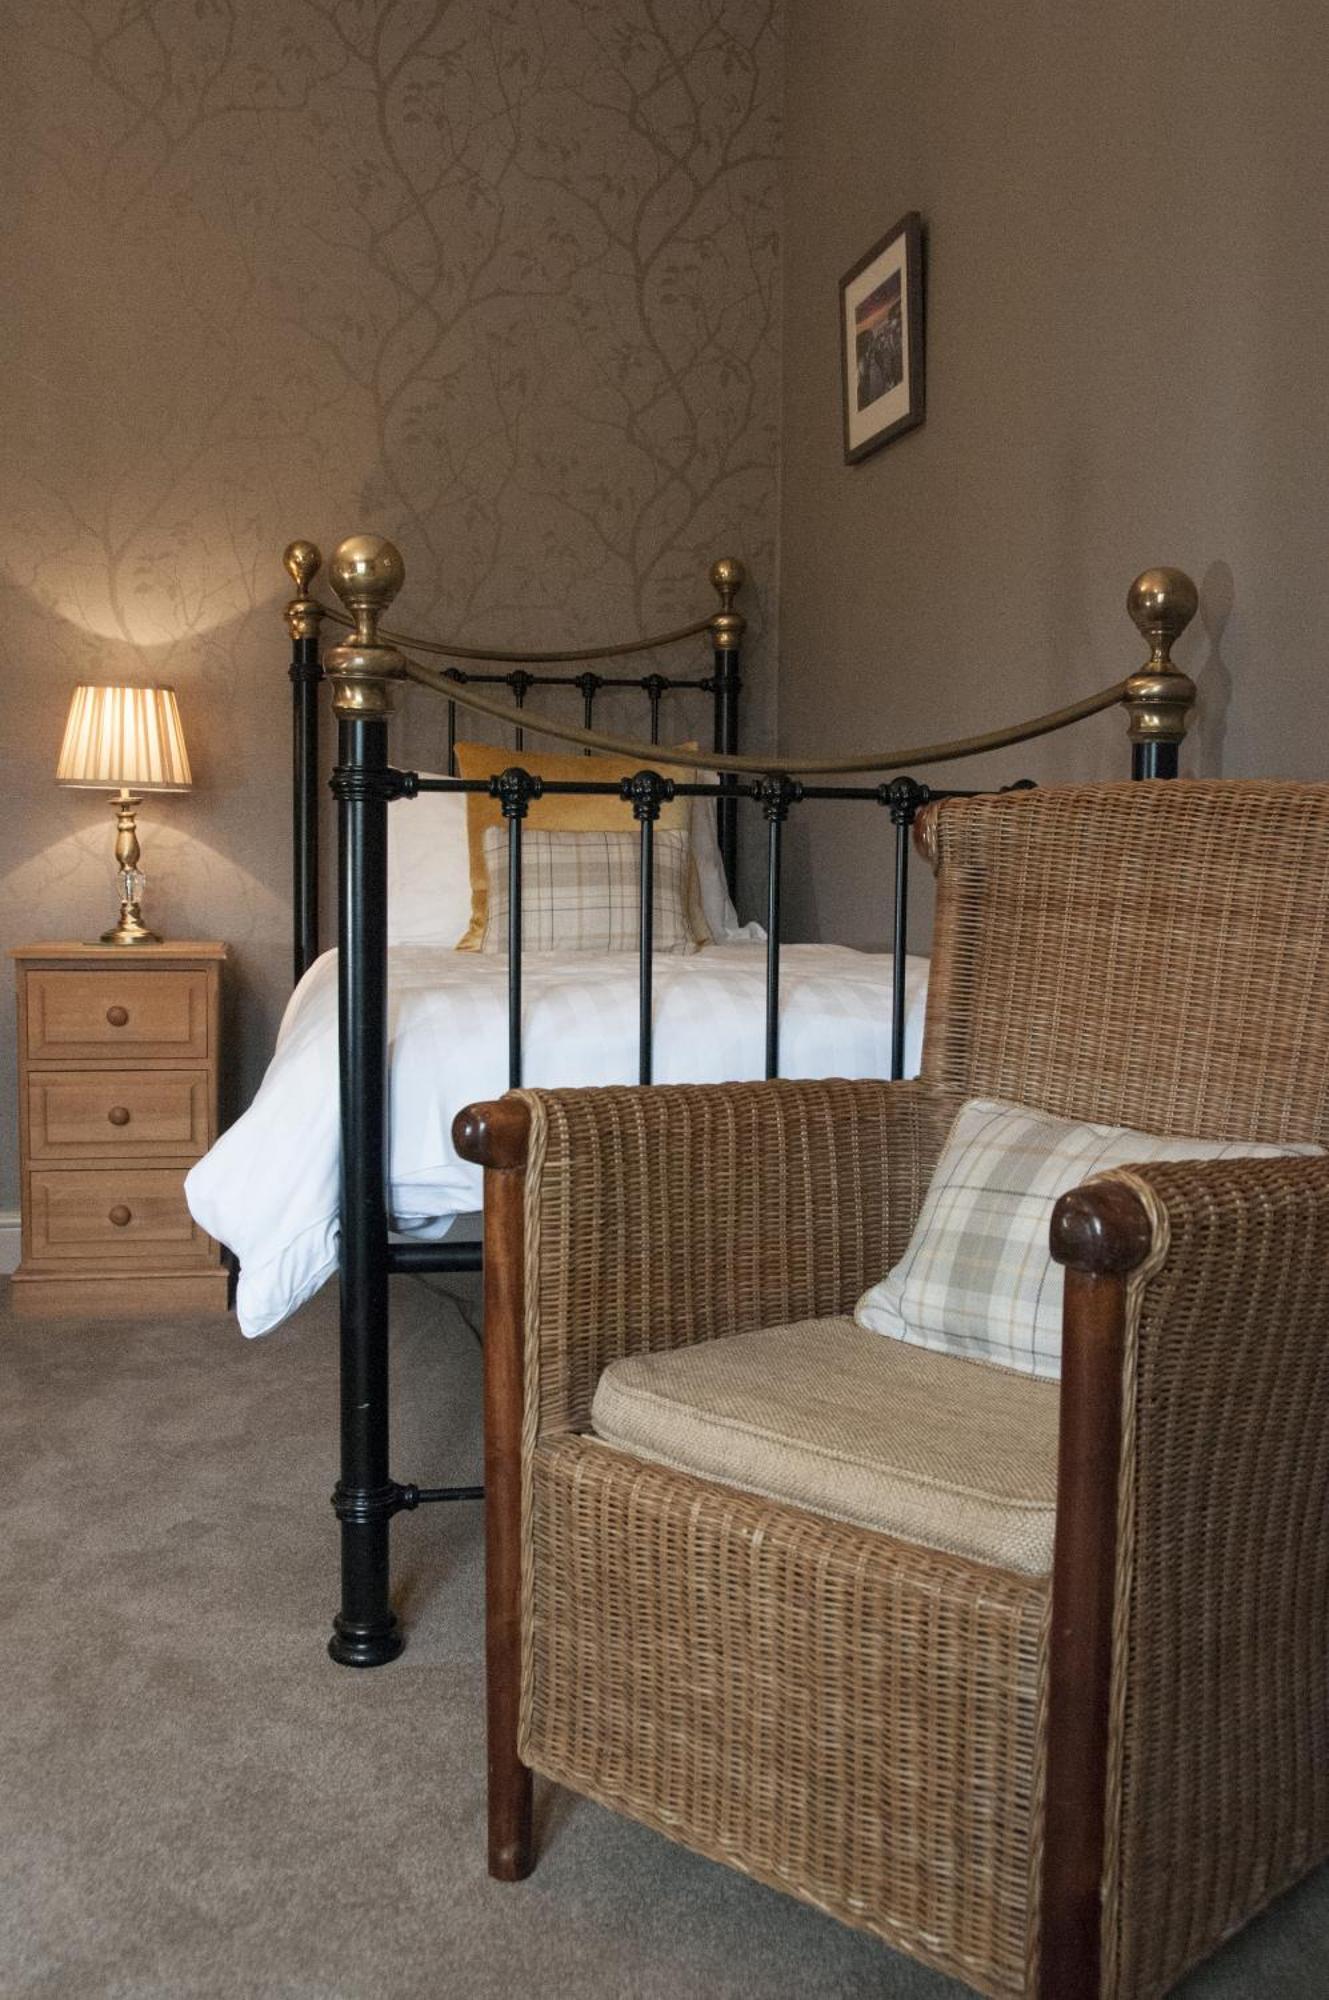 The Poplars Rooms & Cottages Thirsk Room photo